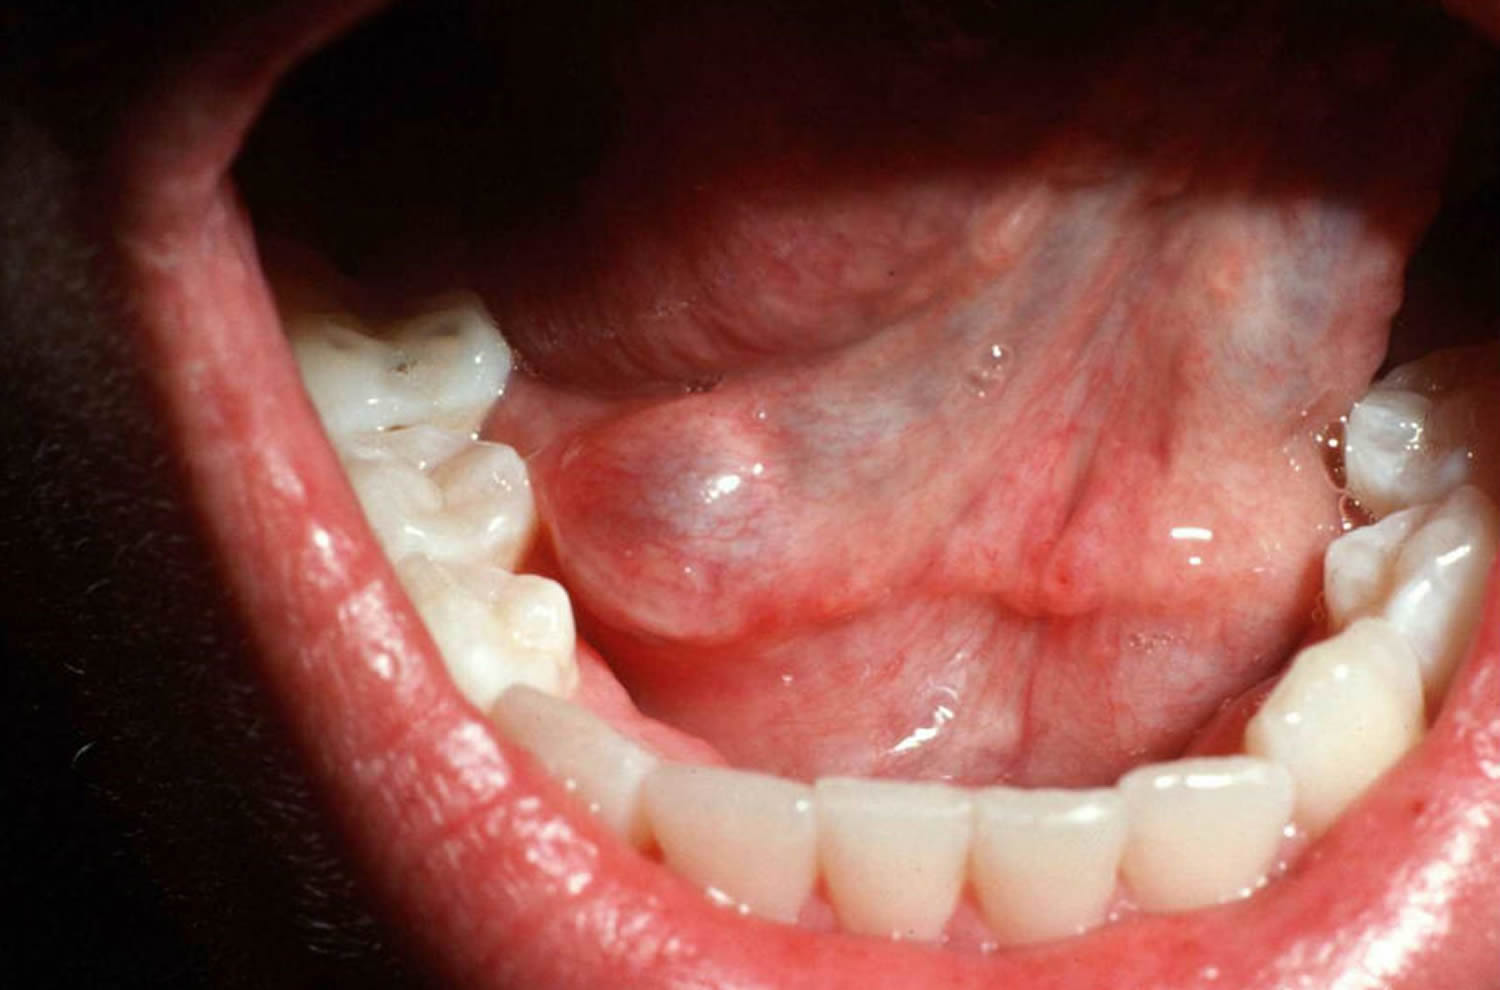 Mucous cyst on the floor of the mouth